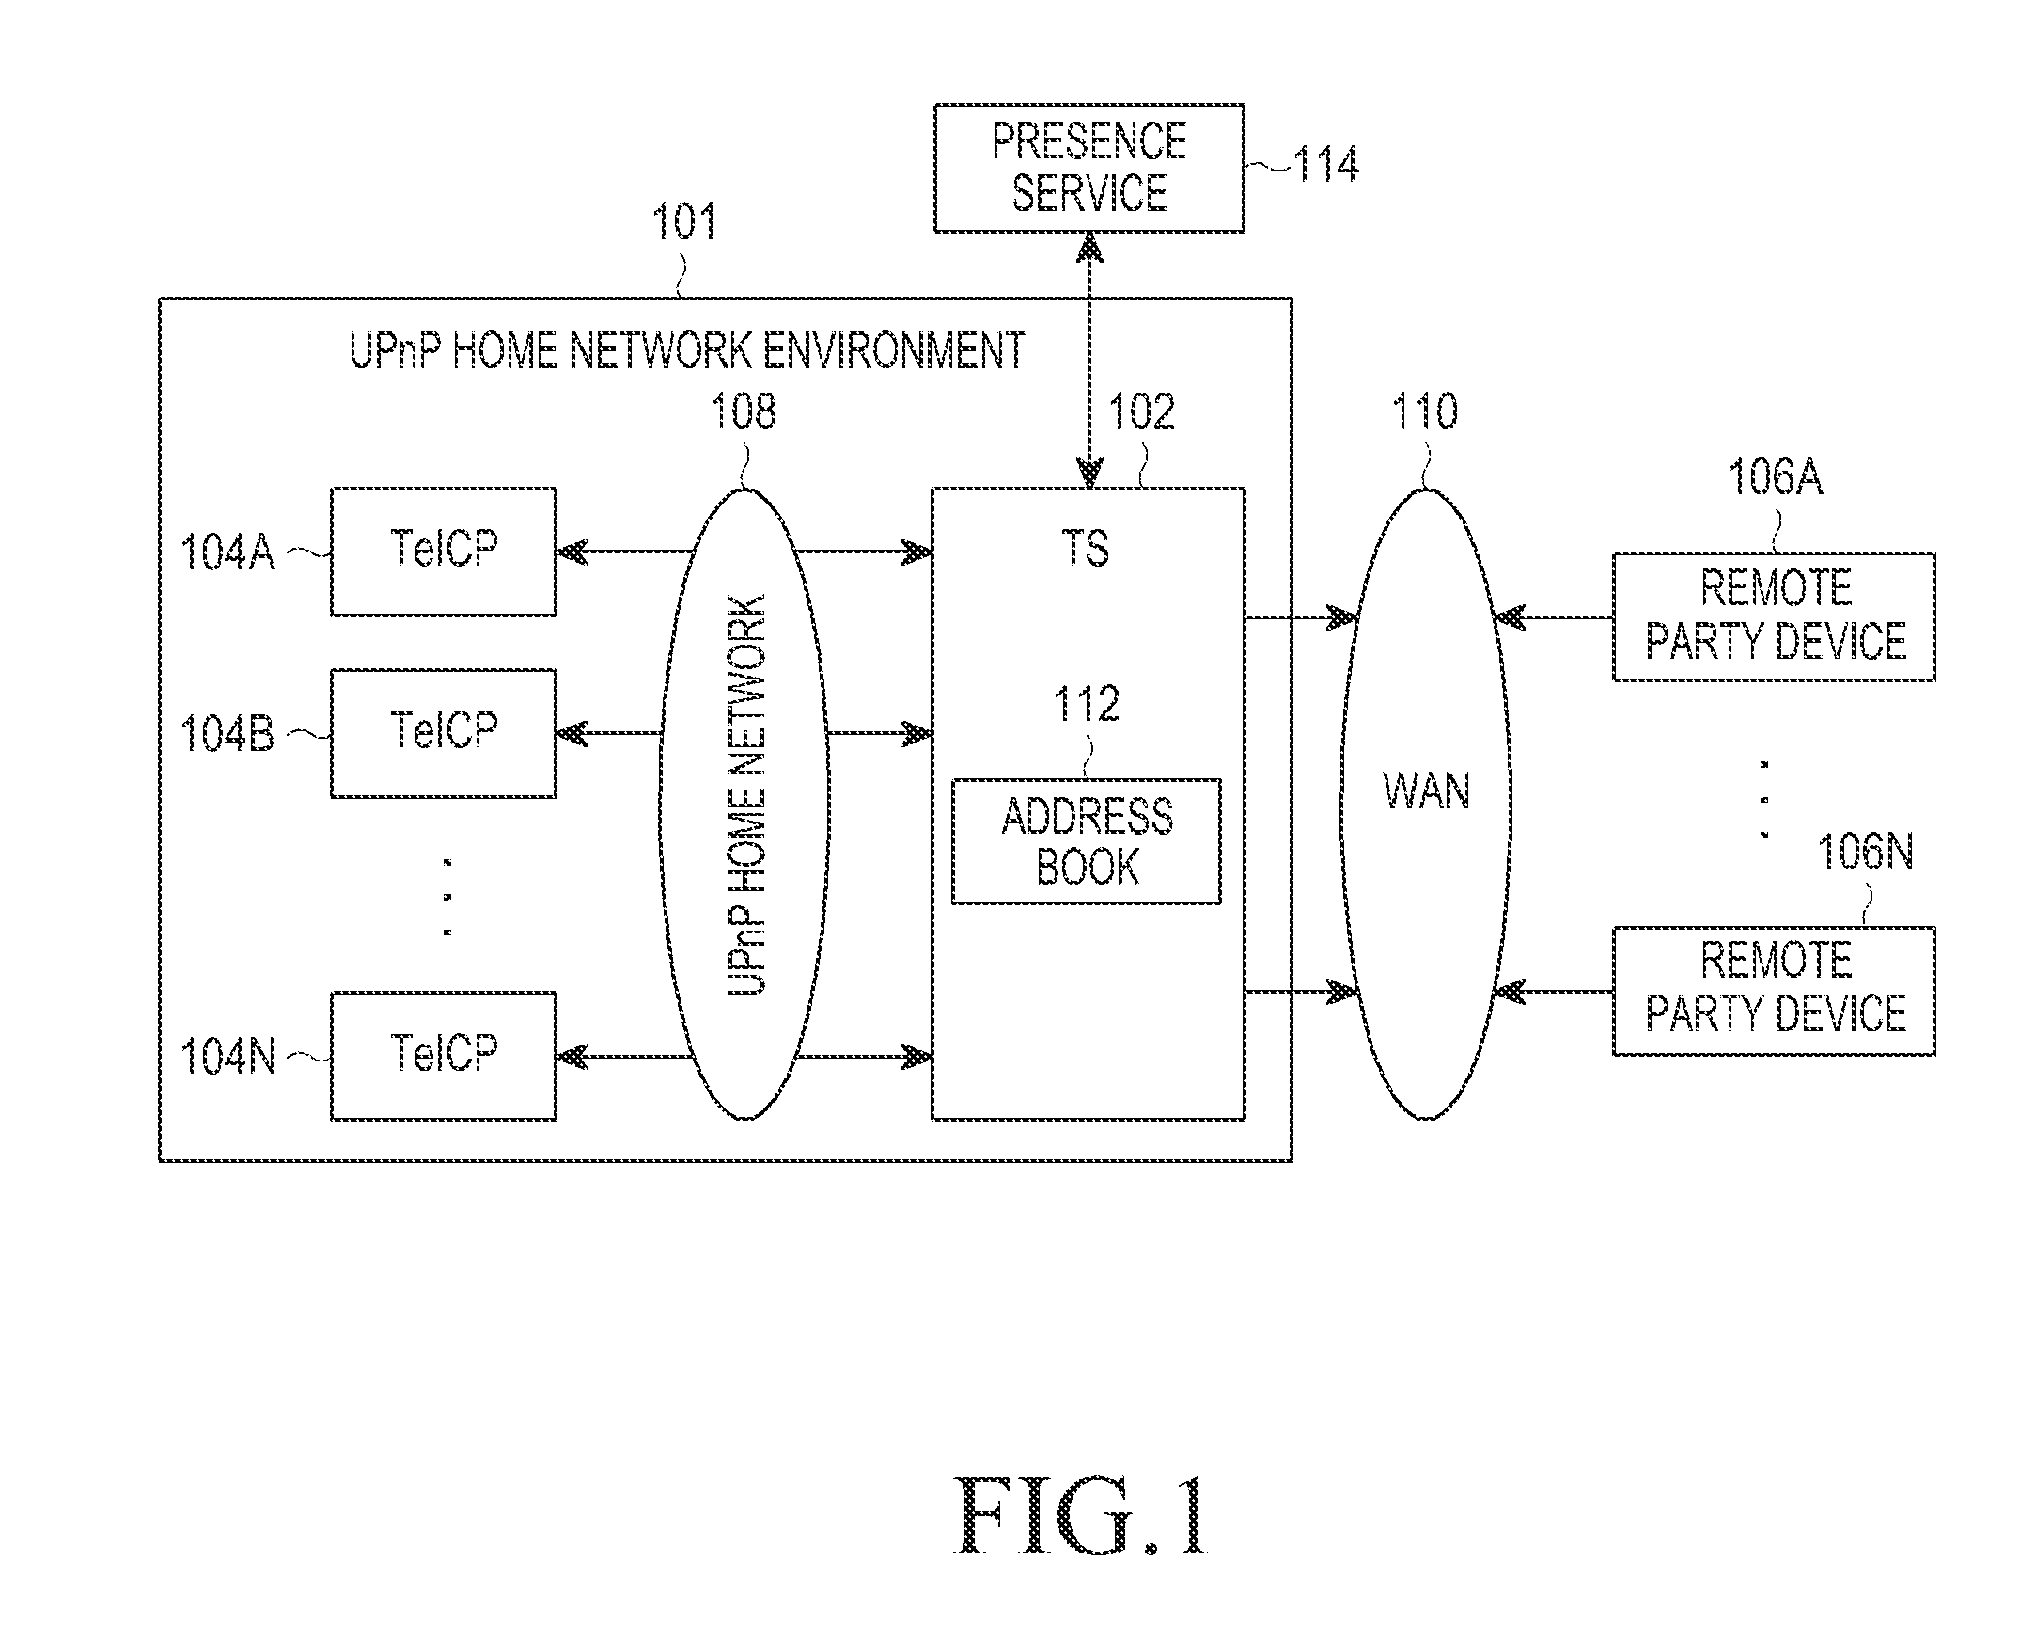 Method and system for providing an enhanced event notification in an universal plug and play home network environment